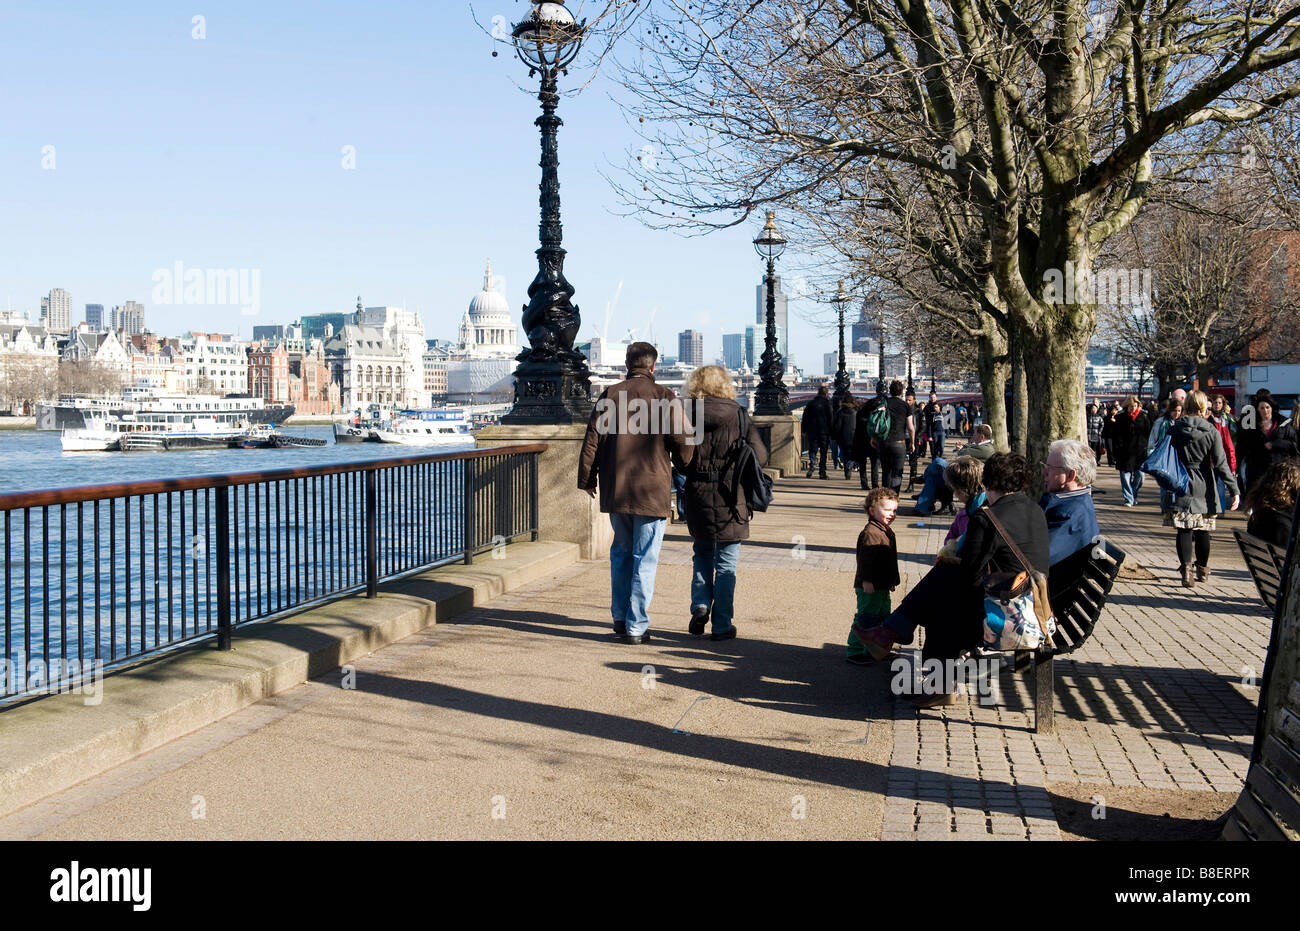 The South Bank of the River Thames, London Stock Photo